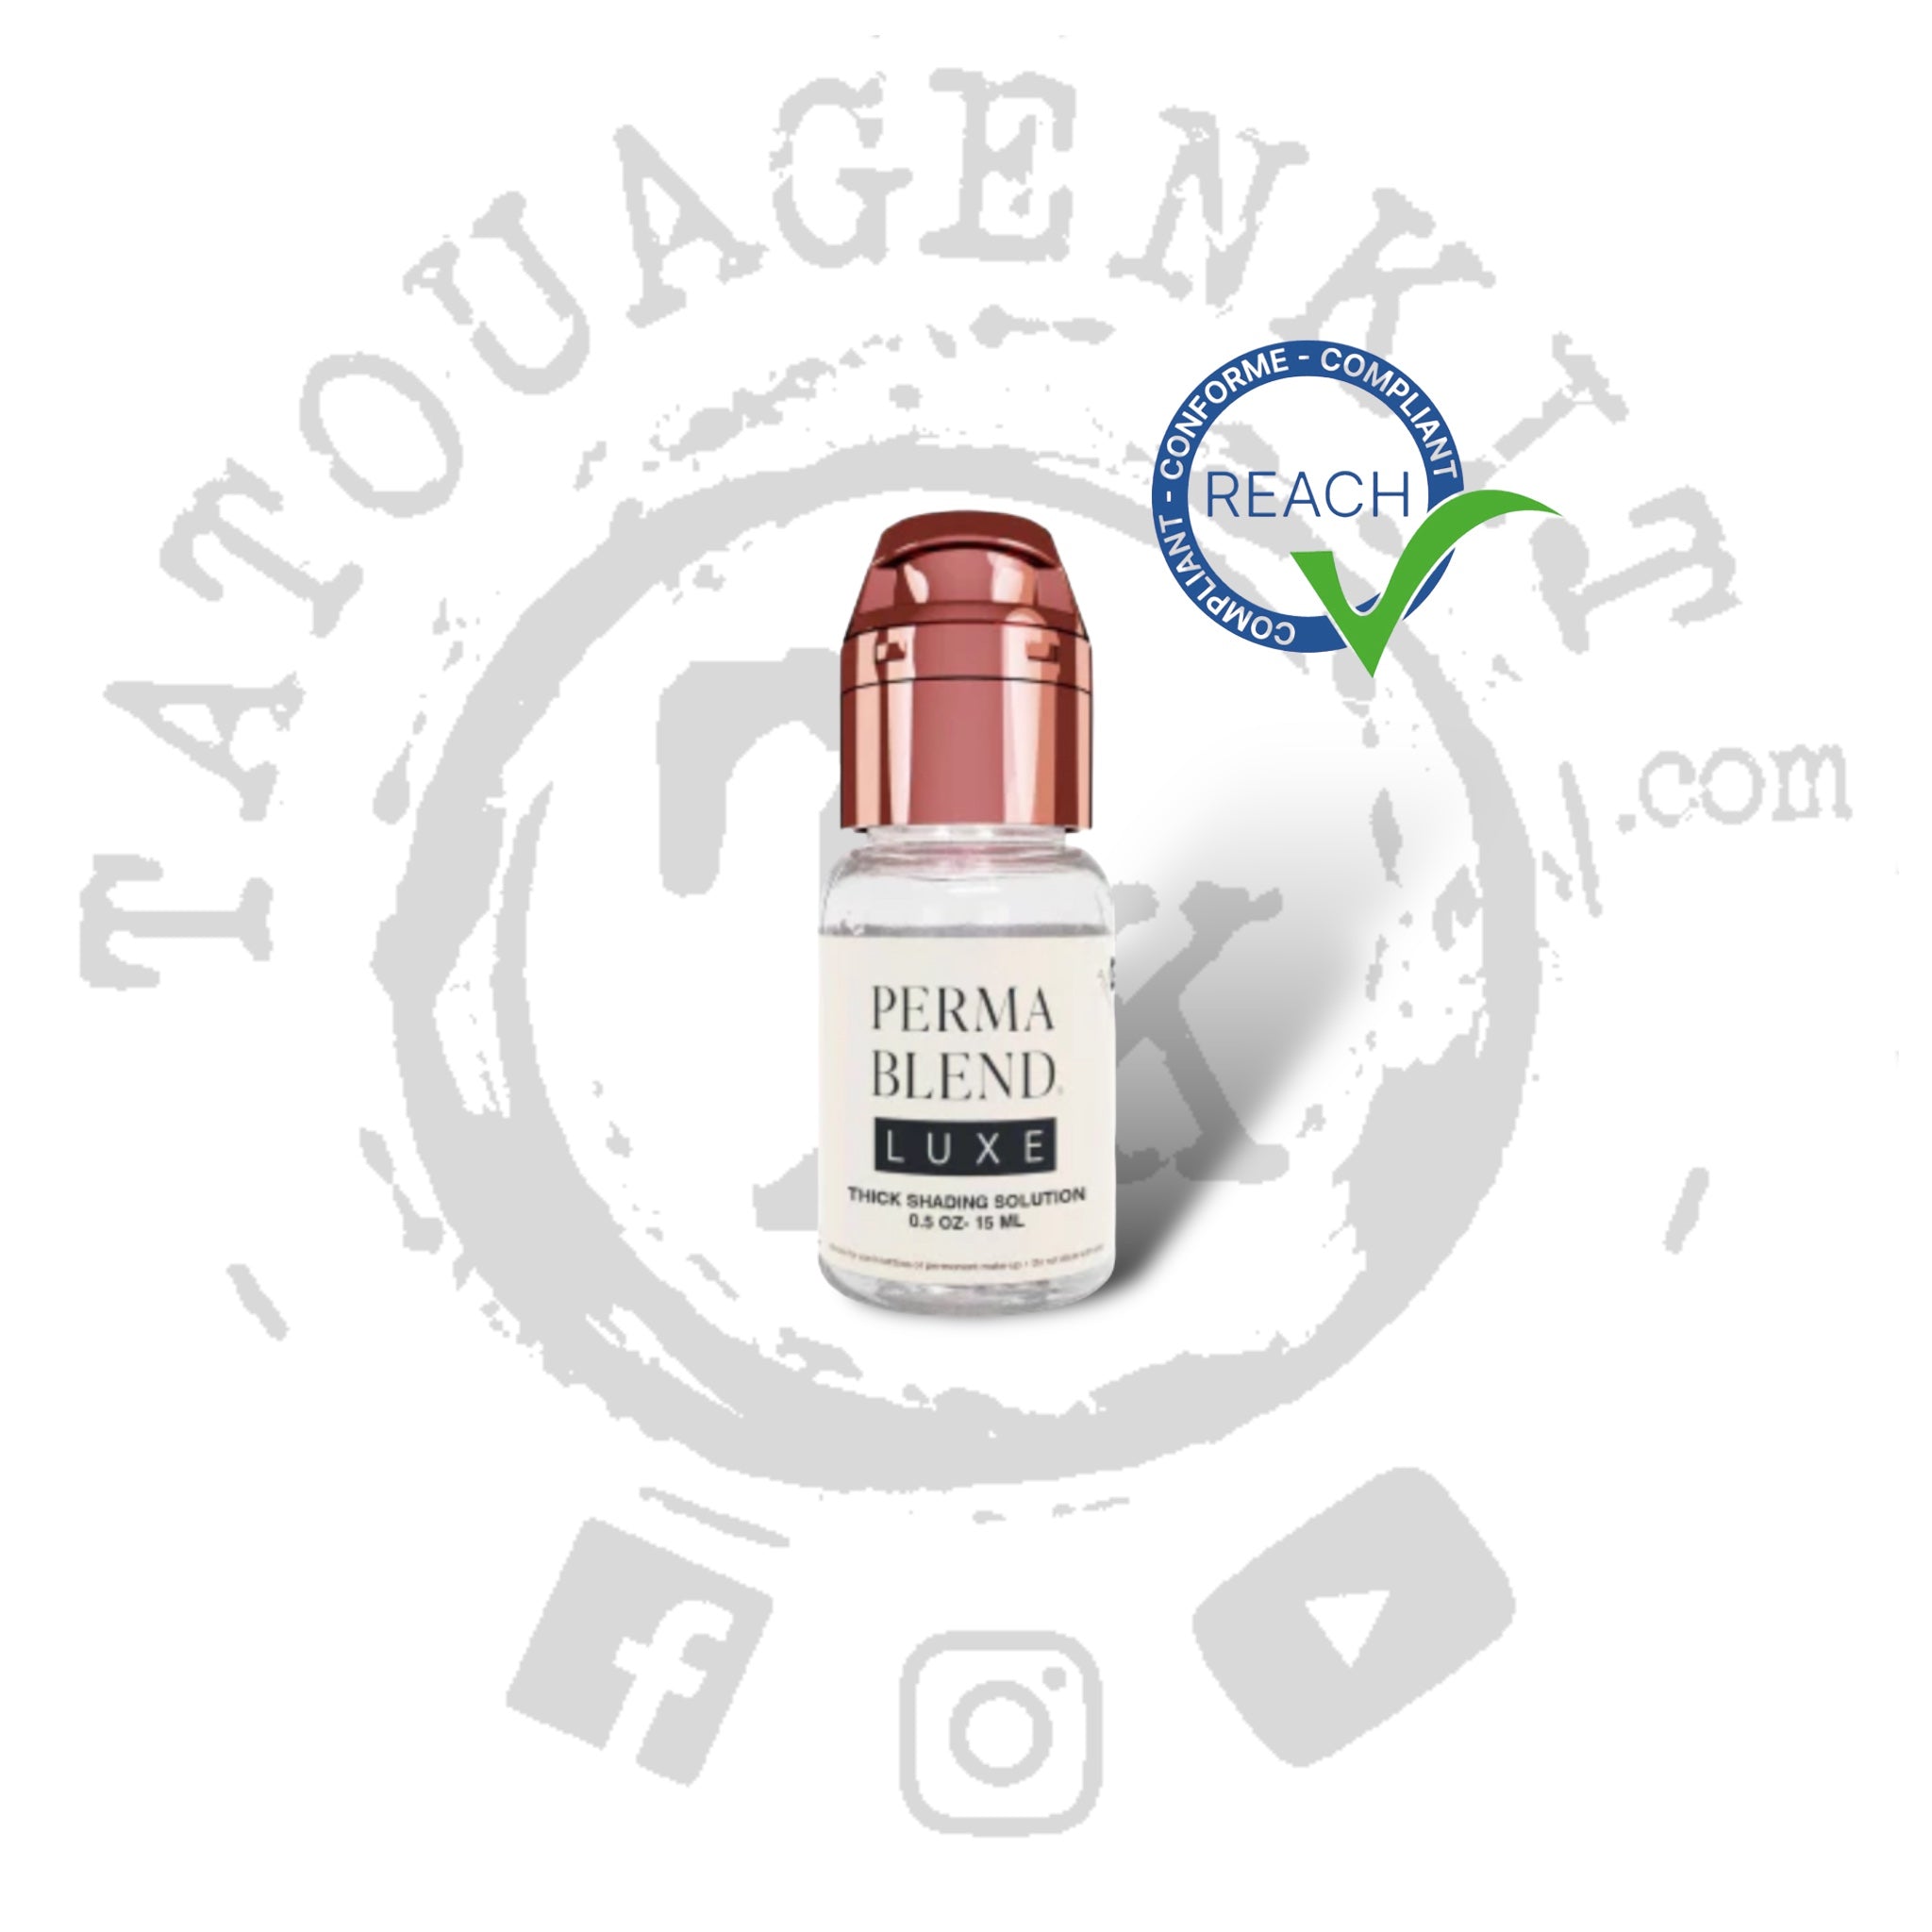 Encre Maquillage Perma Blend Luxe 15ml -Shadind solution